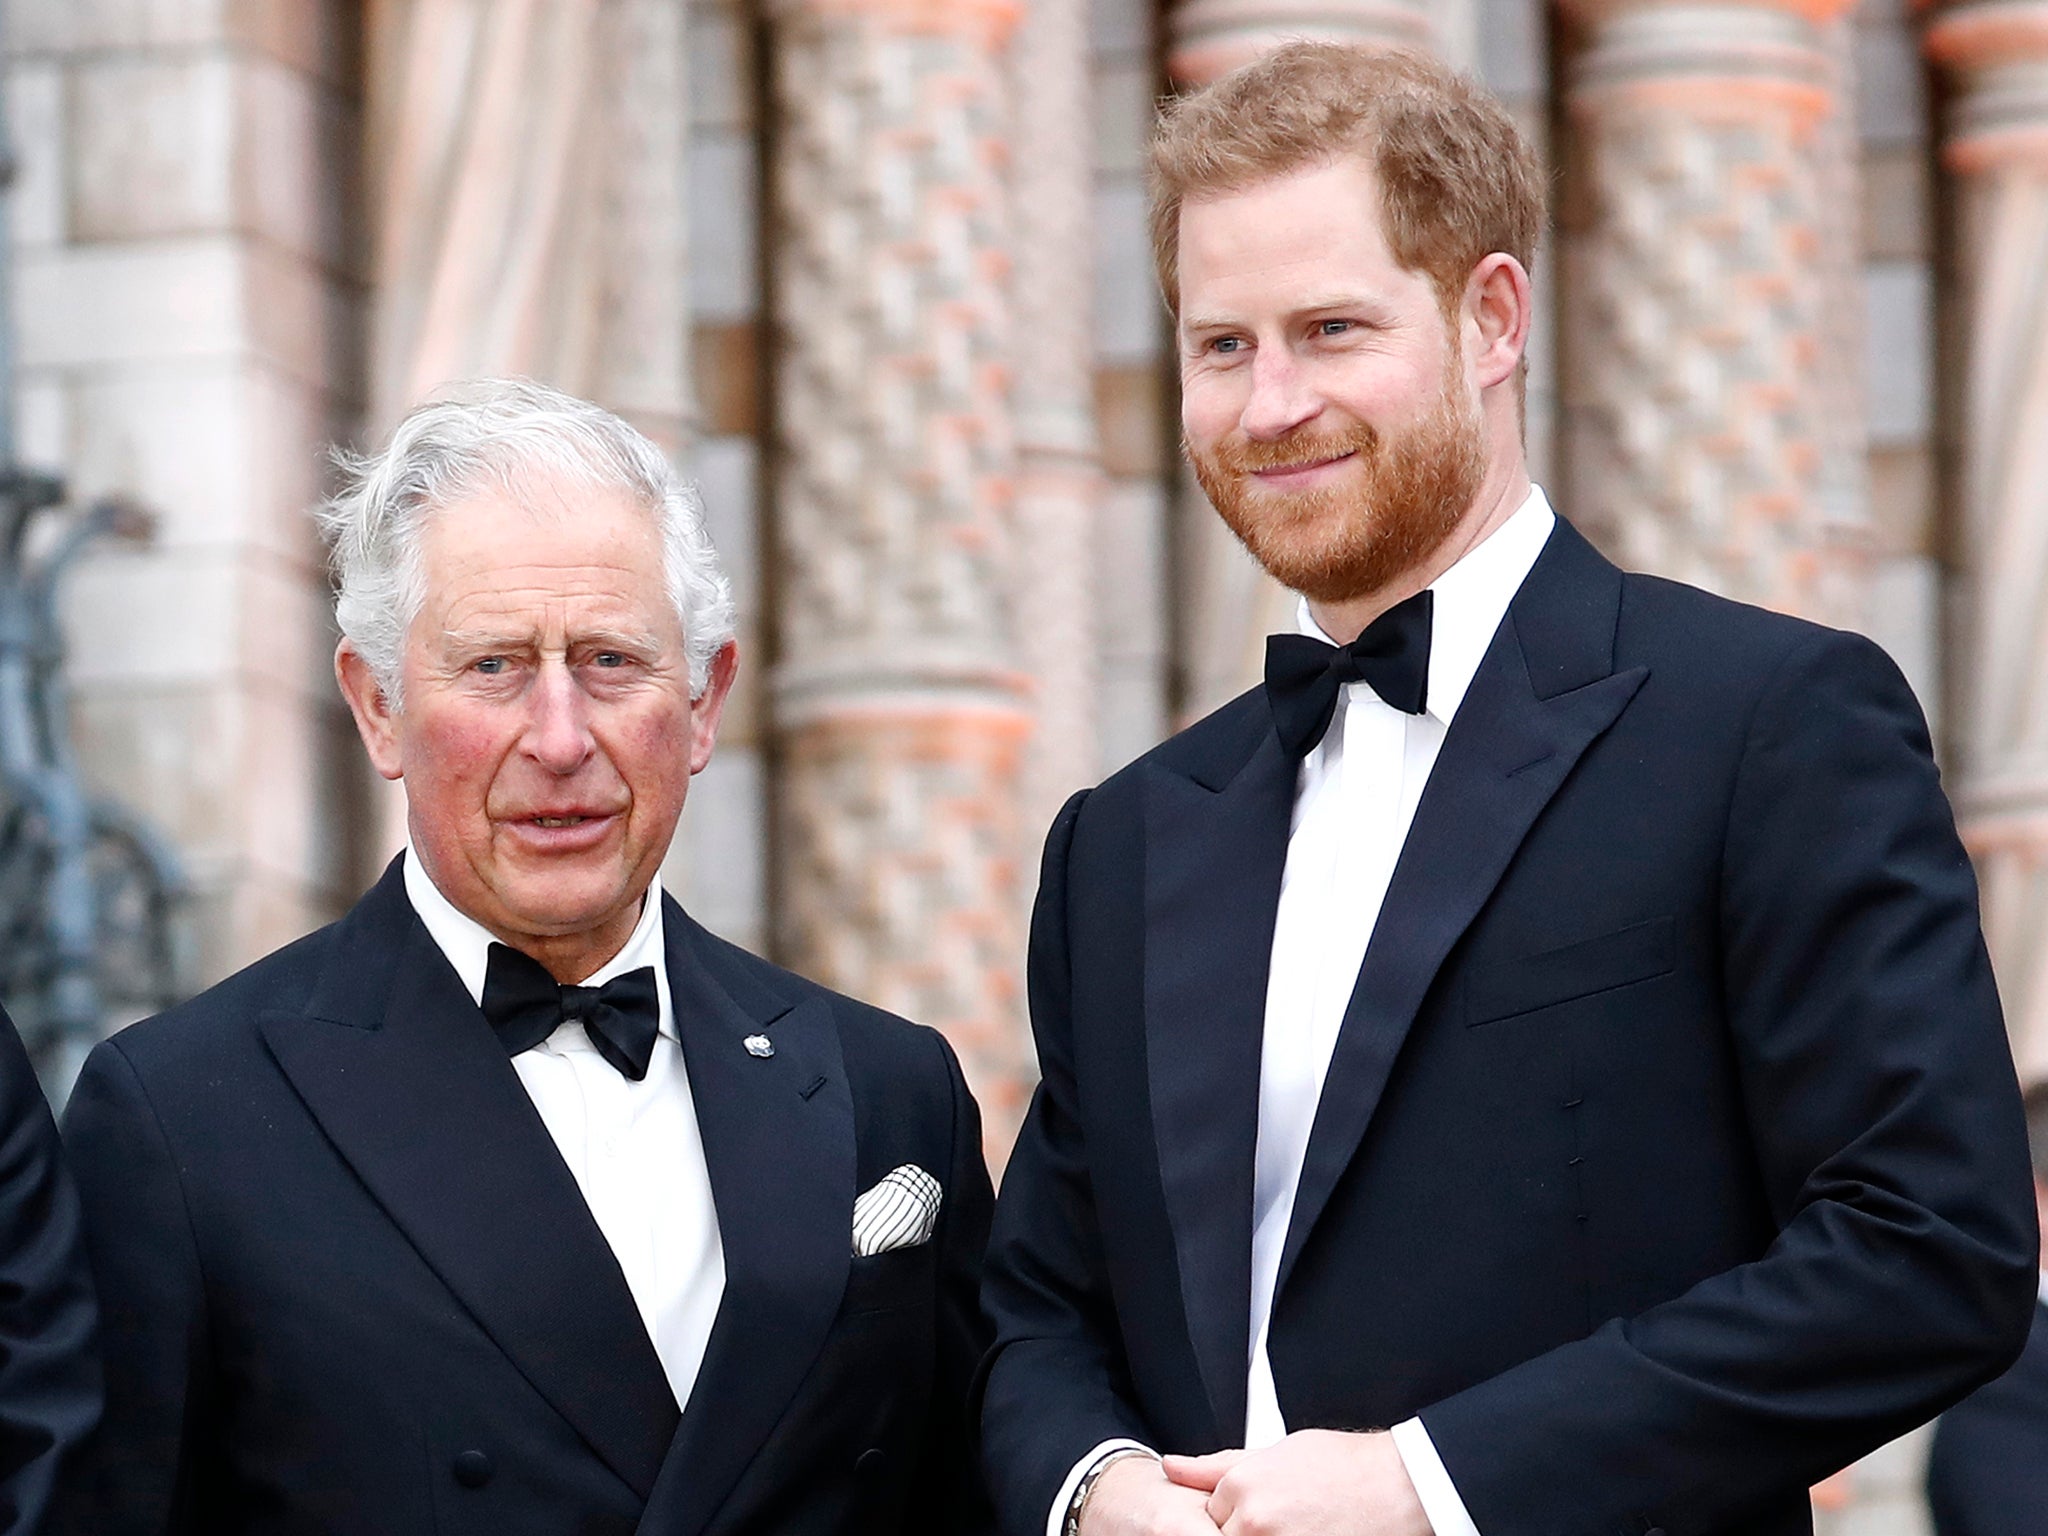 King Charles allegedly ‘stopped’ taking Prince Harry’s calls after the duke moved to California